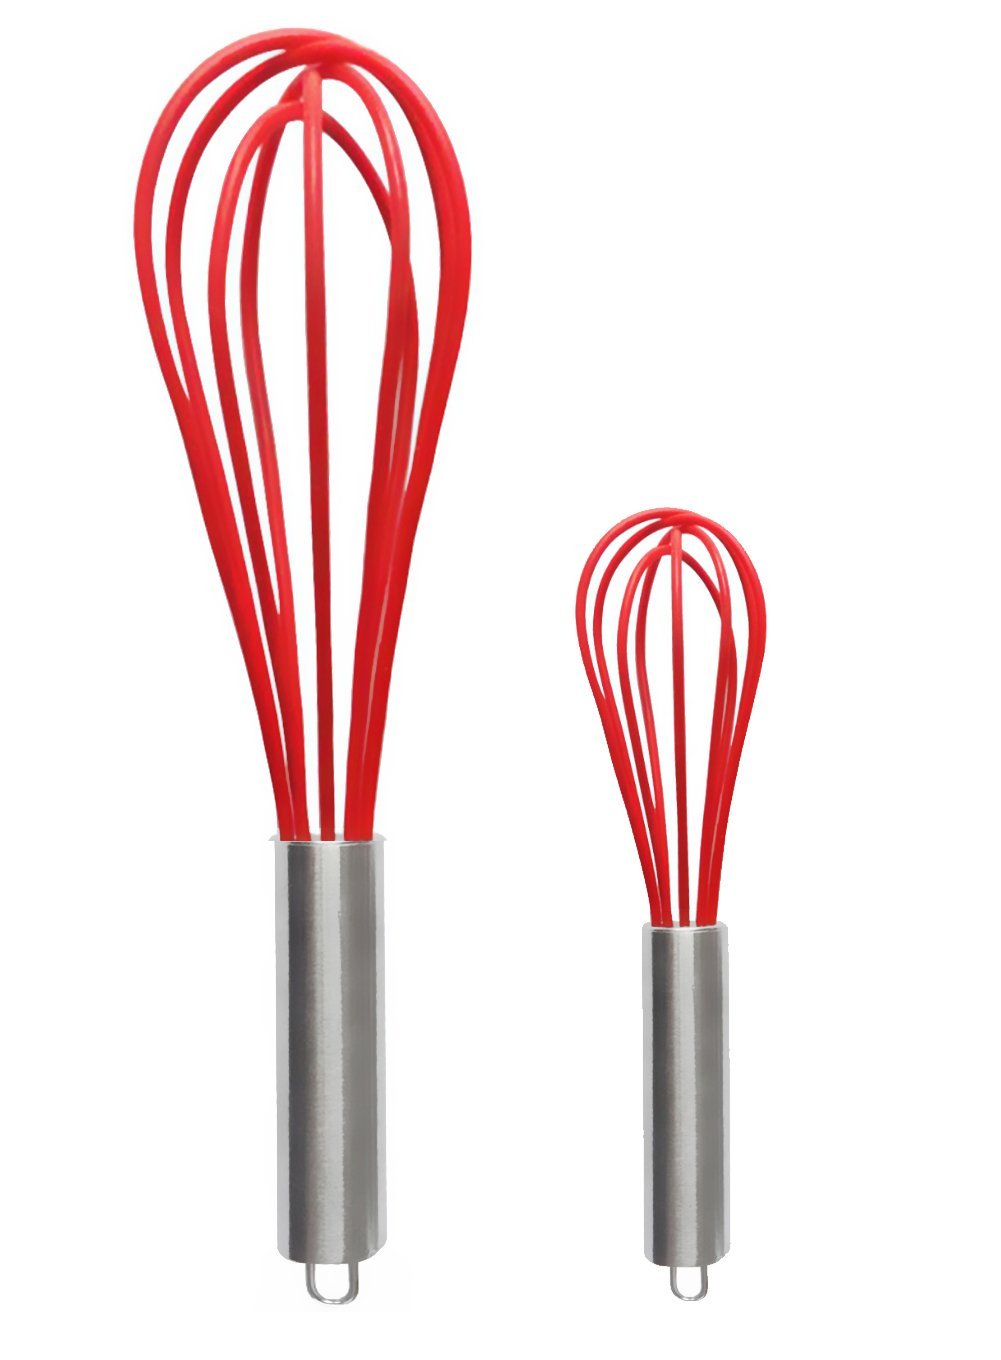 Ouddy 2 Pack Silicone Whisk, Balloon Whisk Set, Egg Frother, Mil